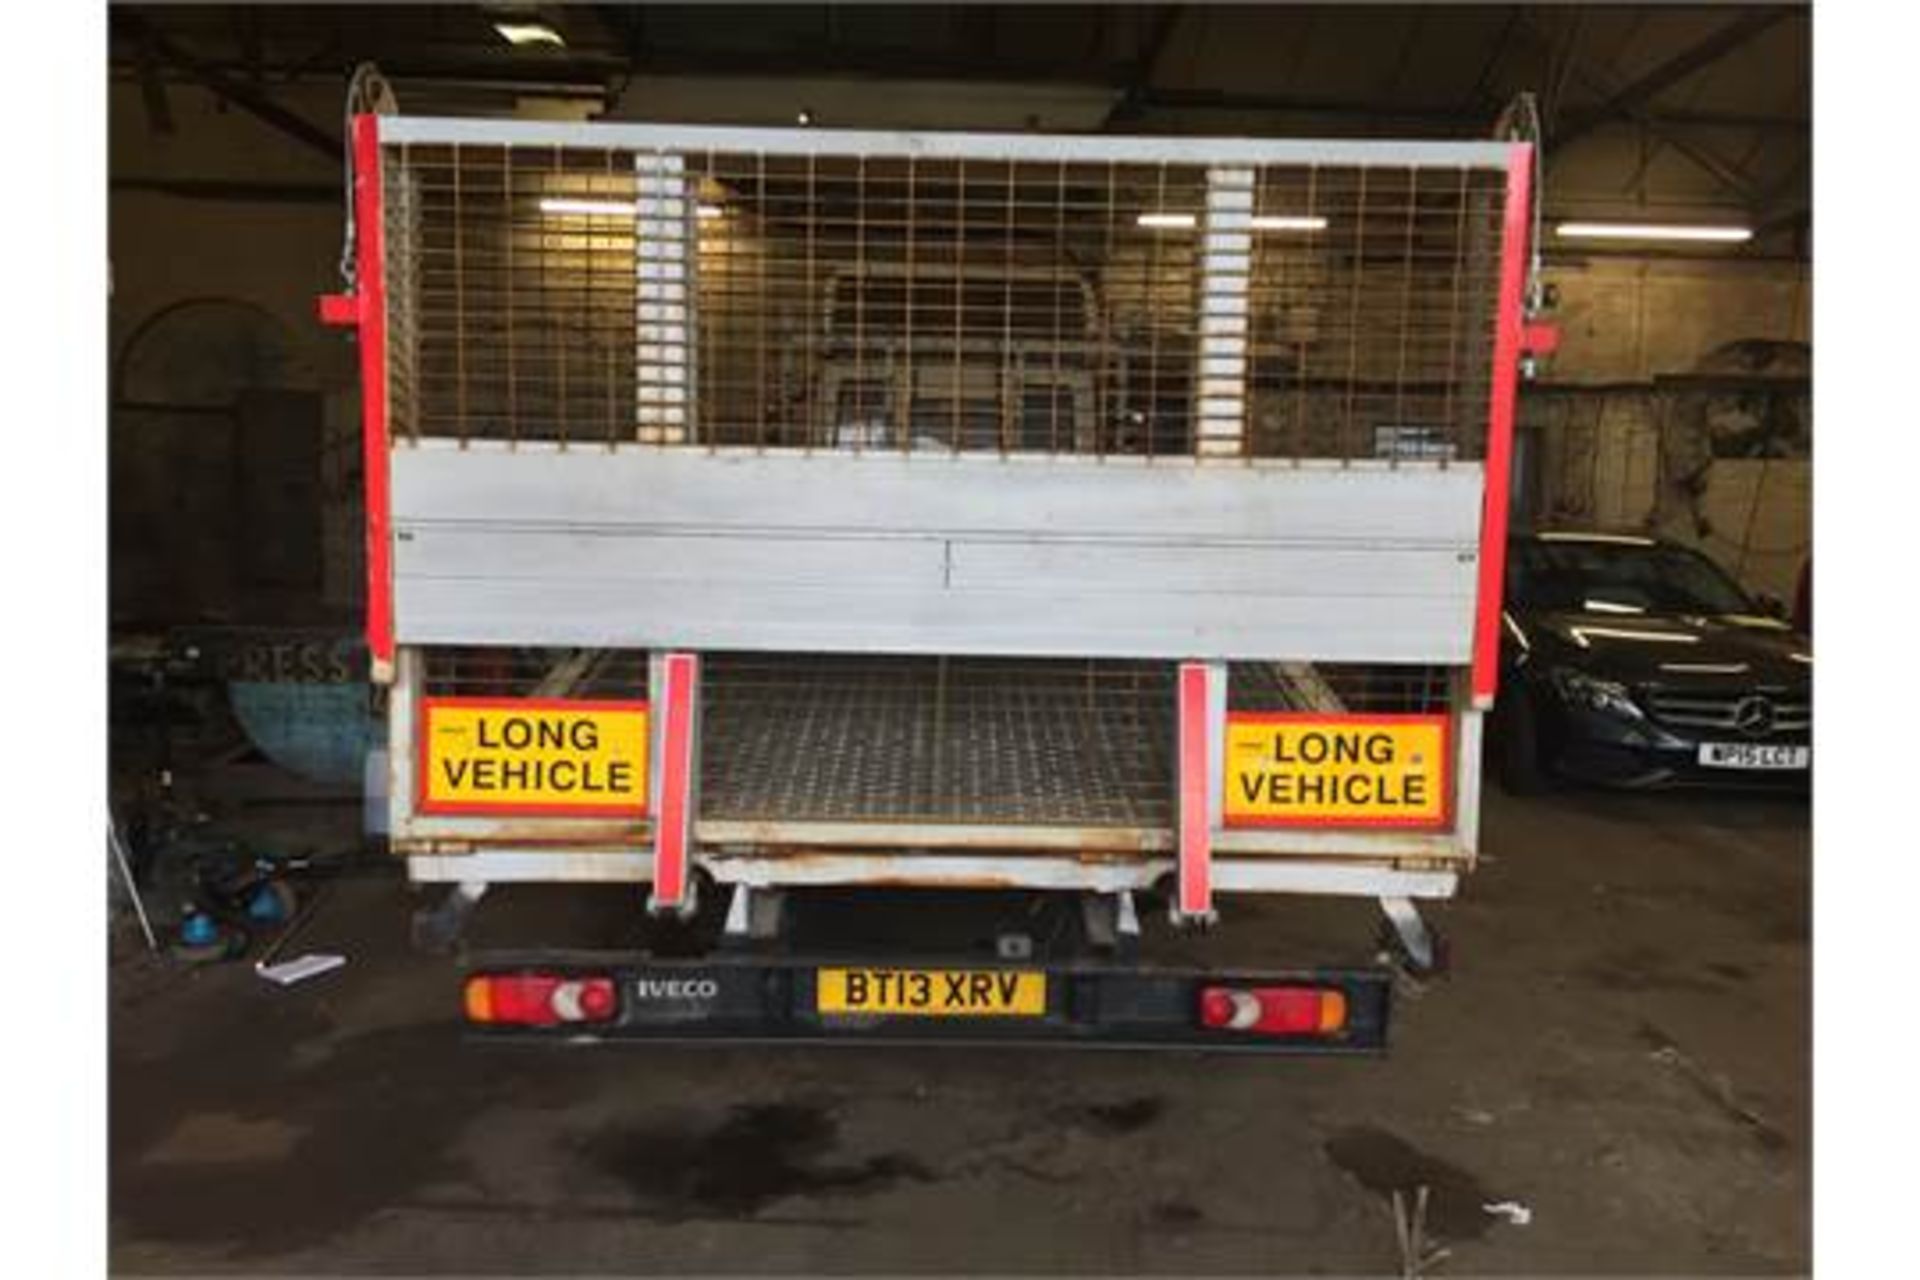 13 Plate Iveco Truck & 2 non runner trucks included - Image 6 of 6